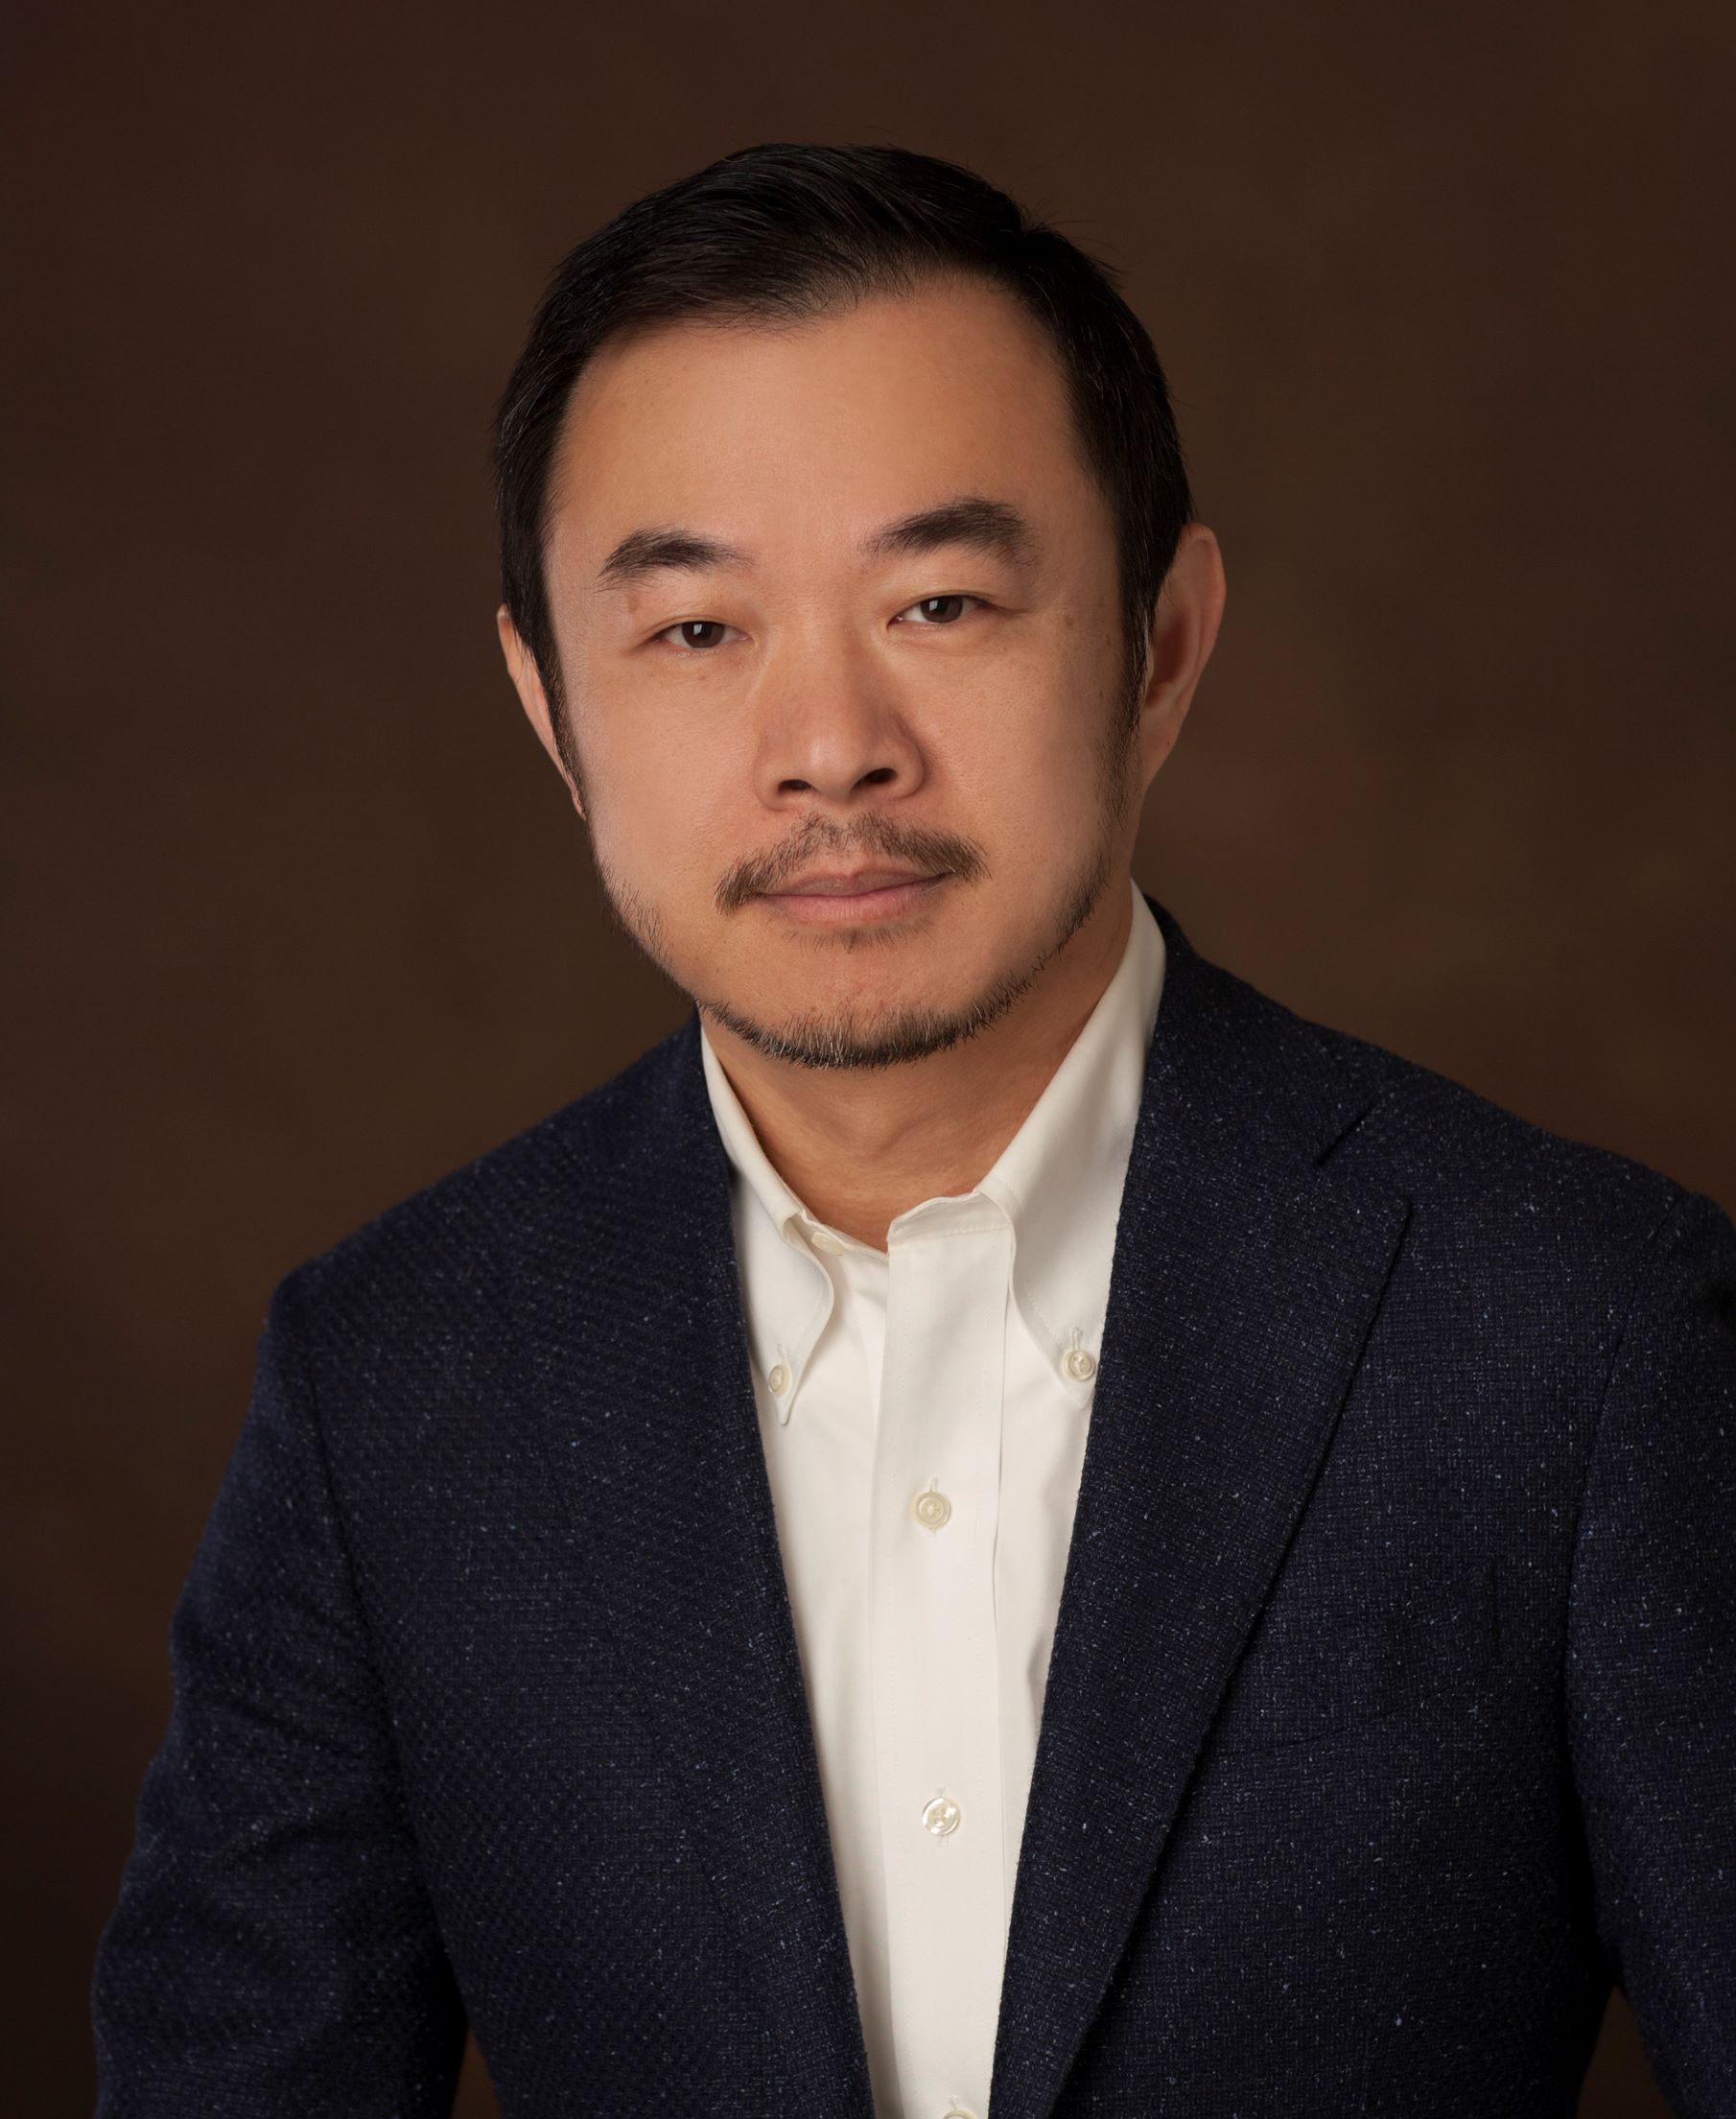 MBZUAI Appoints World-Renowned Leading AI Academic Professor Dr. Eric Xing As President